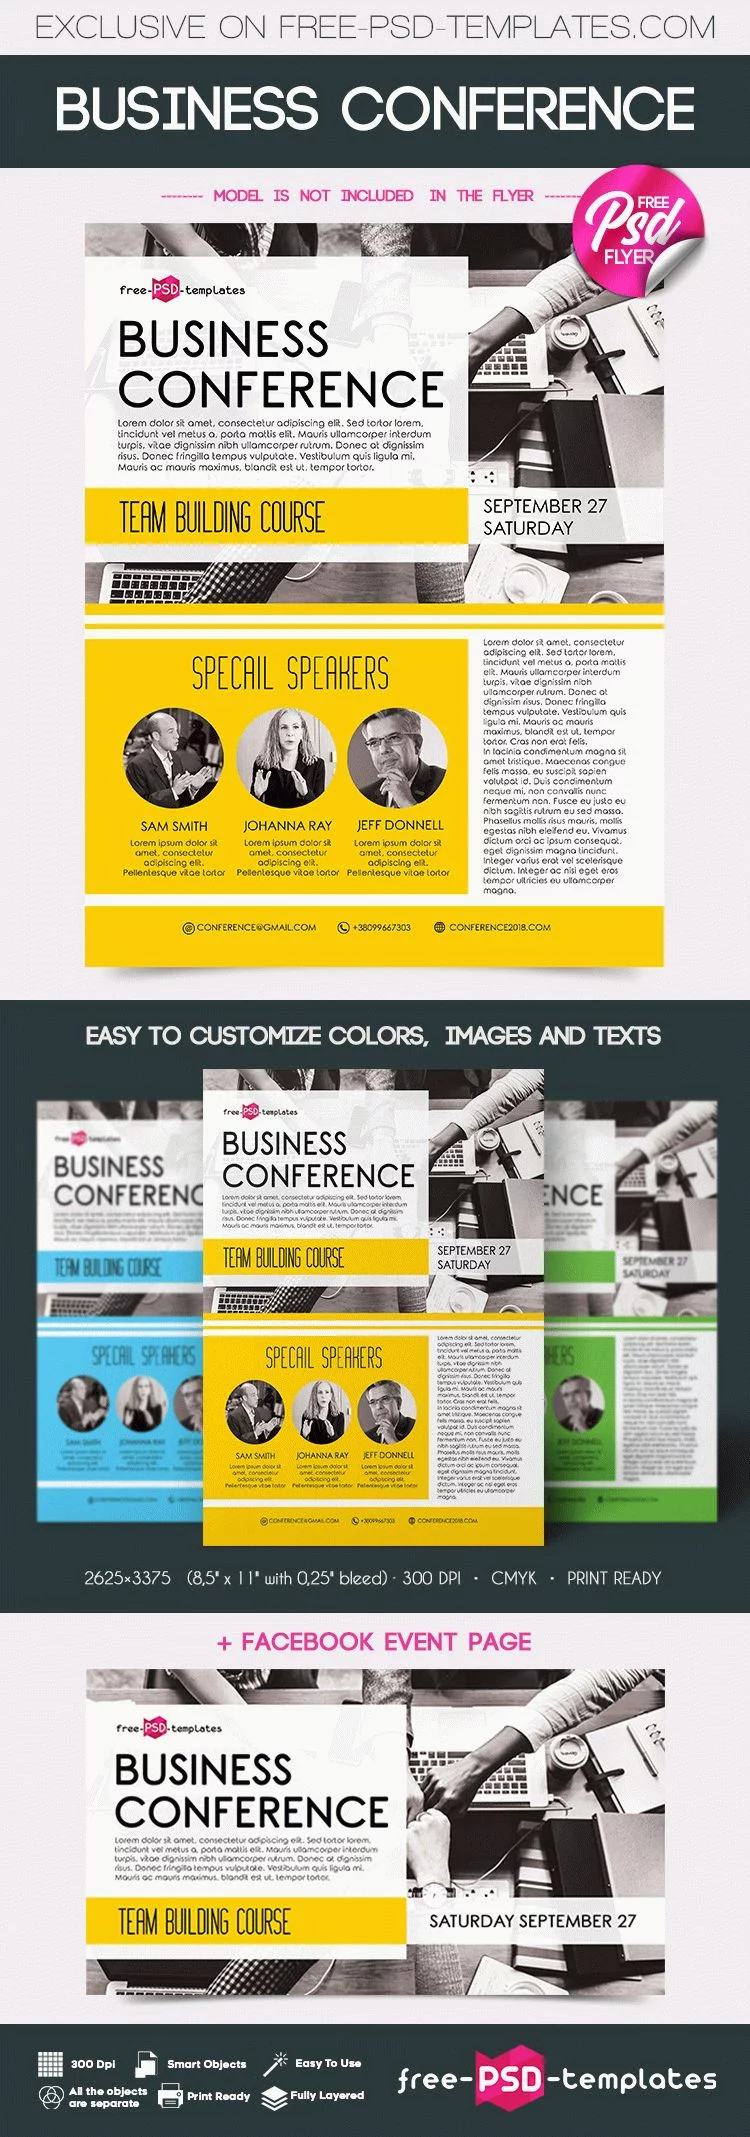 Free Business Conference Flyer in PSD